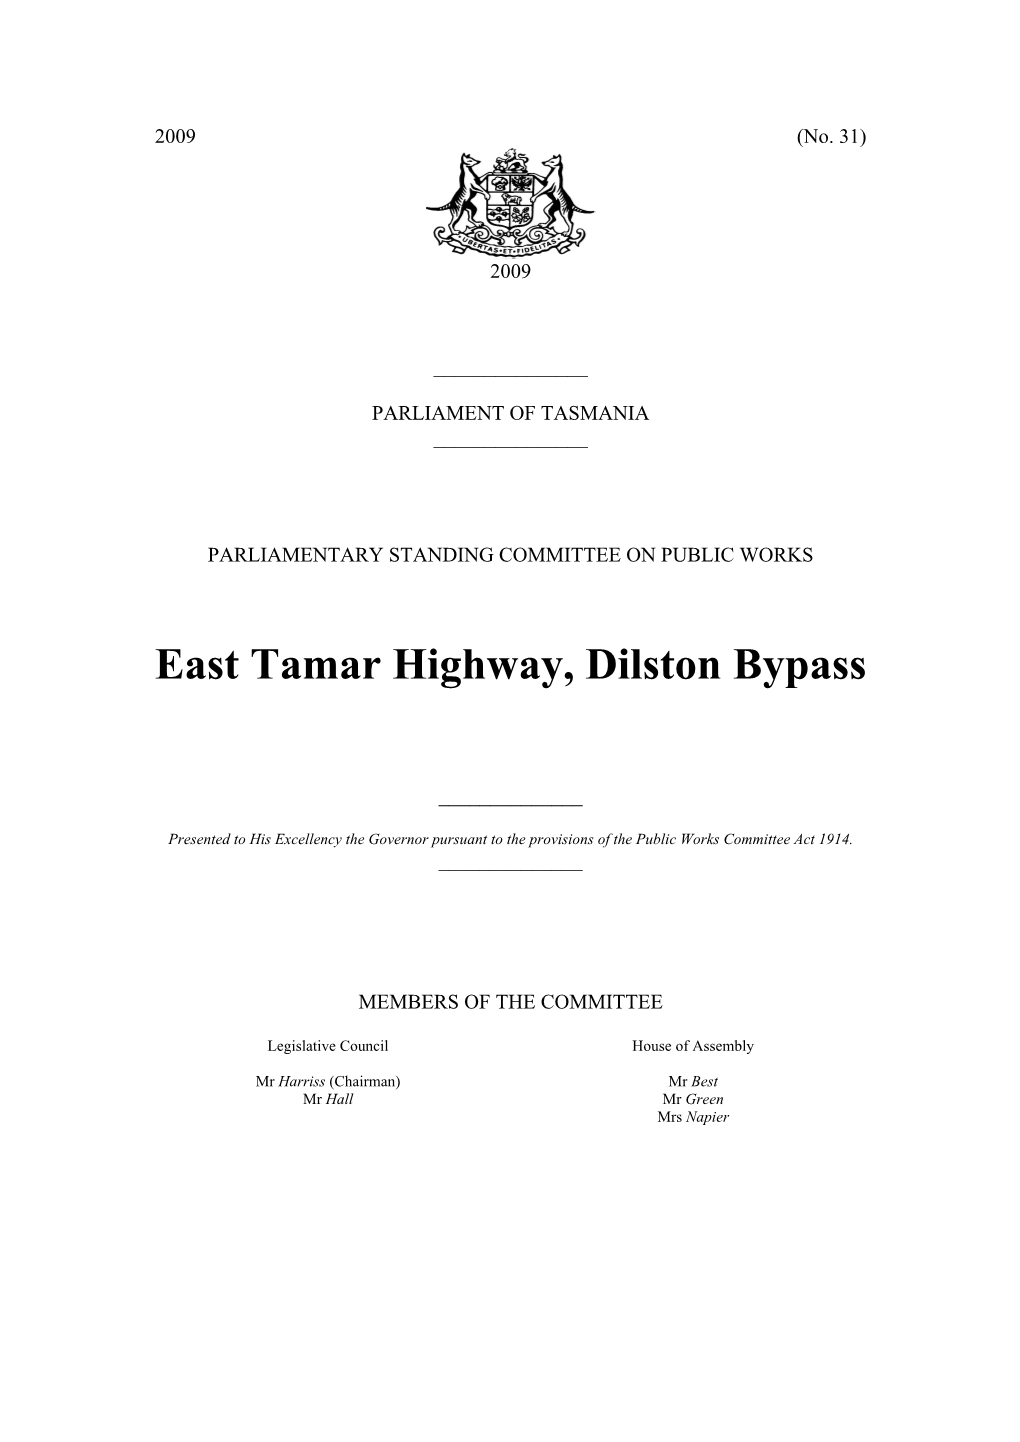 East Tamar Highway, Dilston Bypass